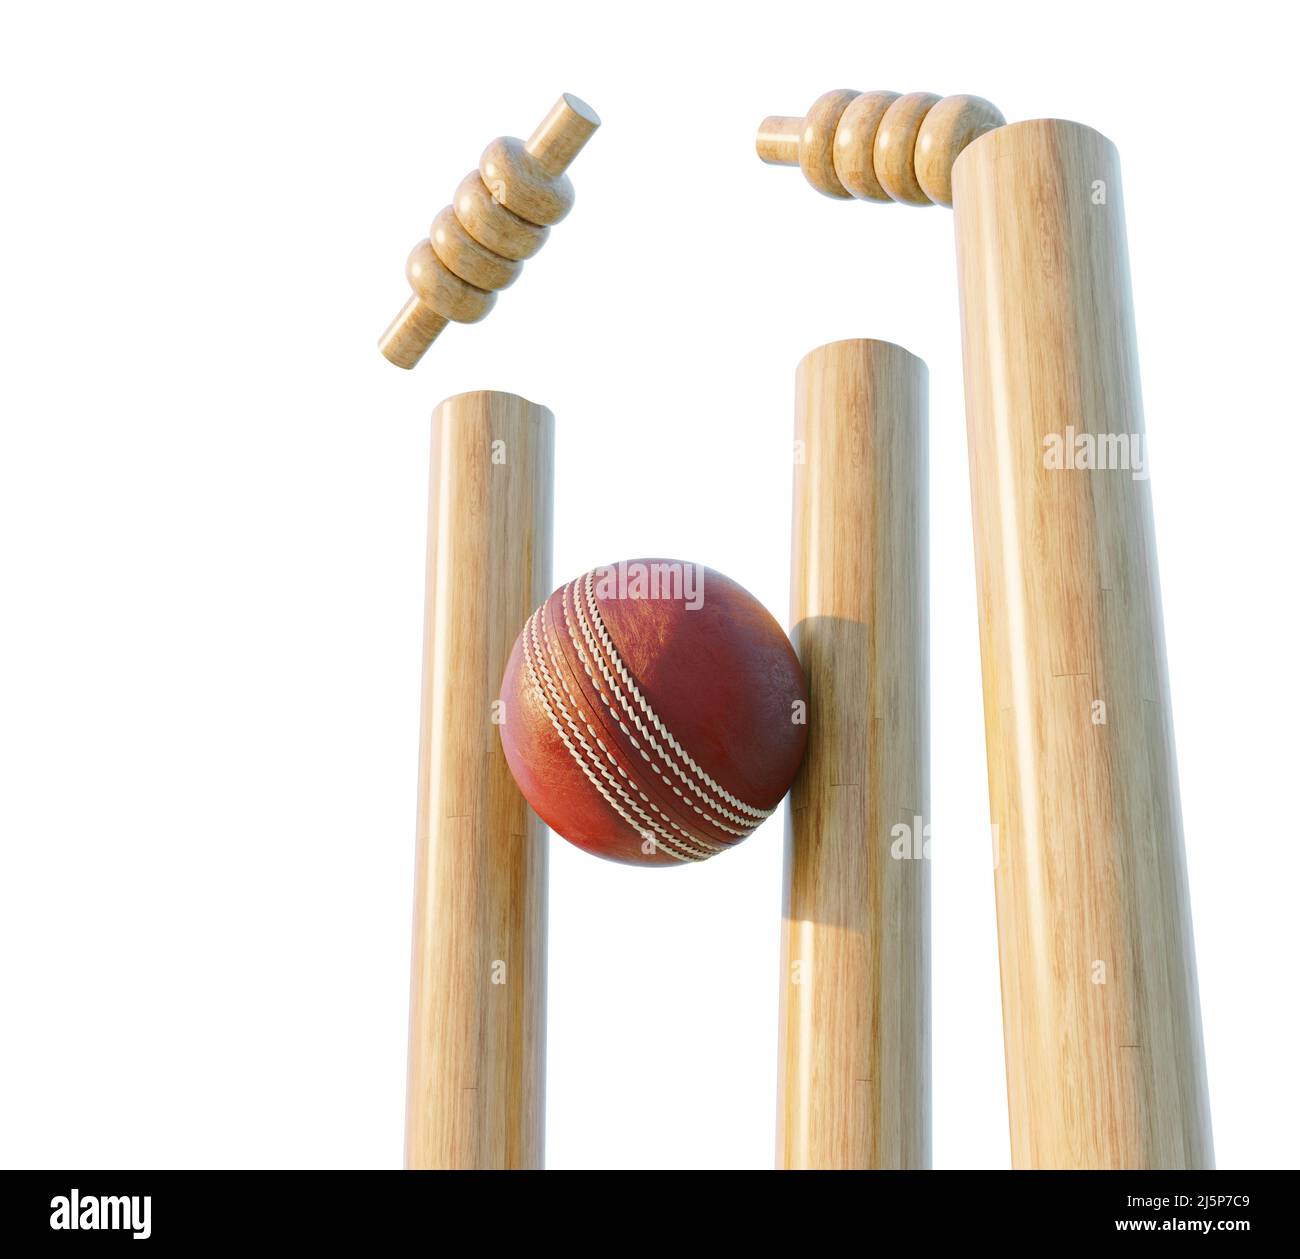 Wooden cricket wickets with dislodging bails on an isolated white background - 3D render Stock Photo